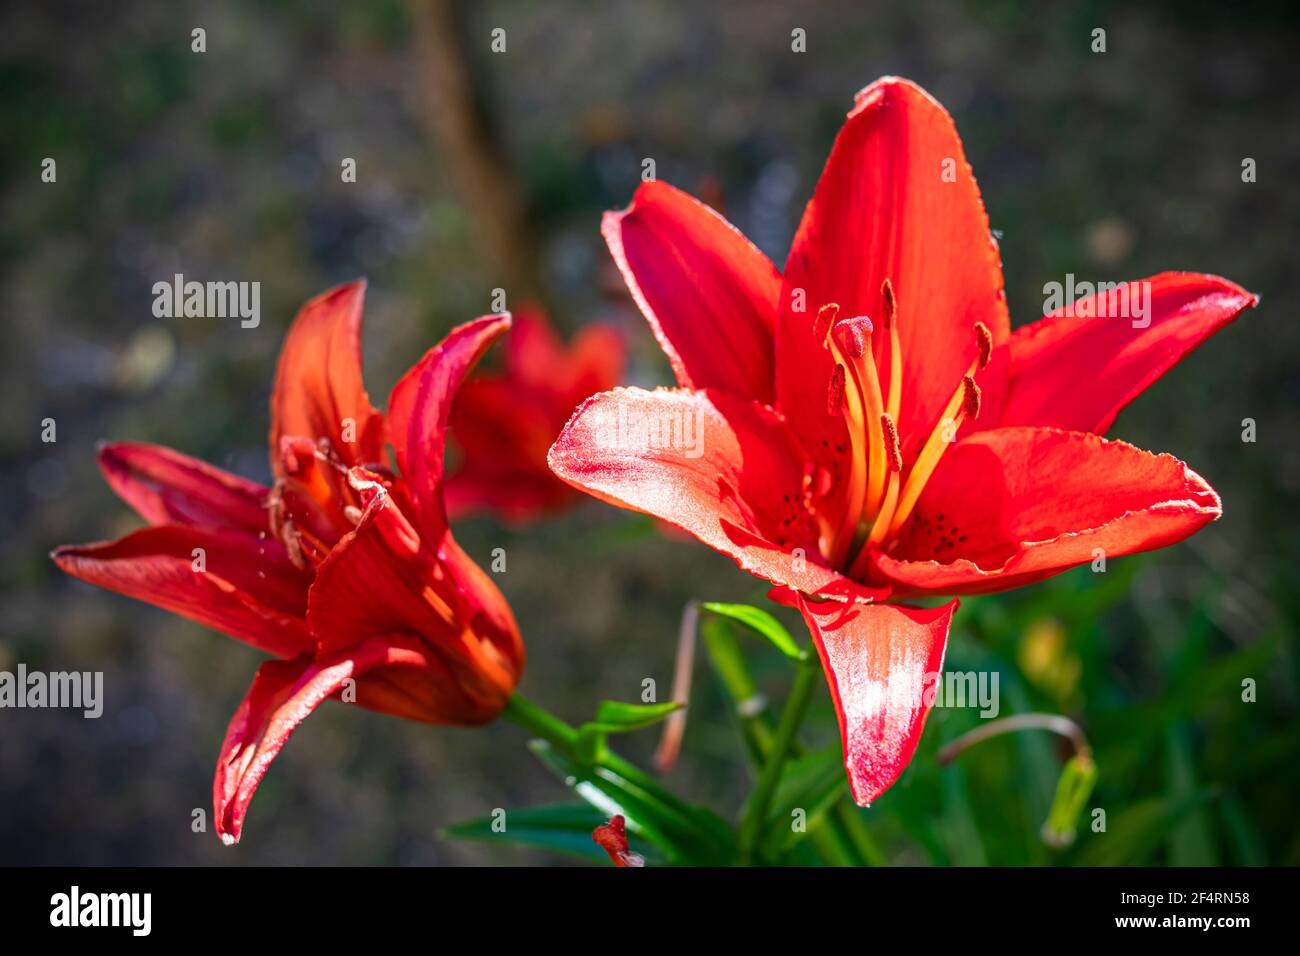 Red Amaryllis. Bulb flower in red and green tones, illuminated by the sun, flared and with focus on stamens and pistil, where pollen is observed Stock Photo